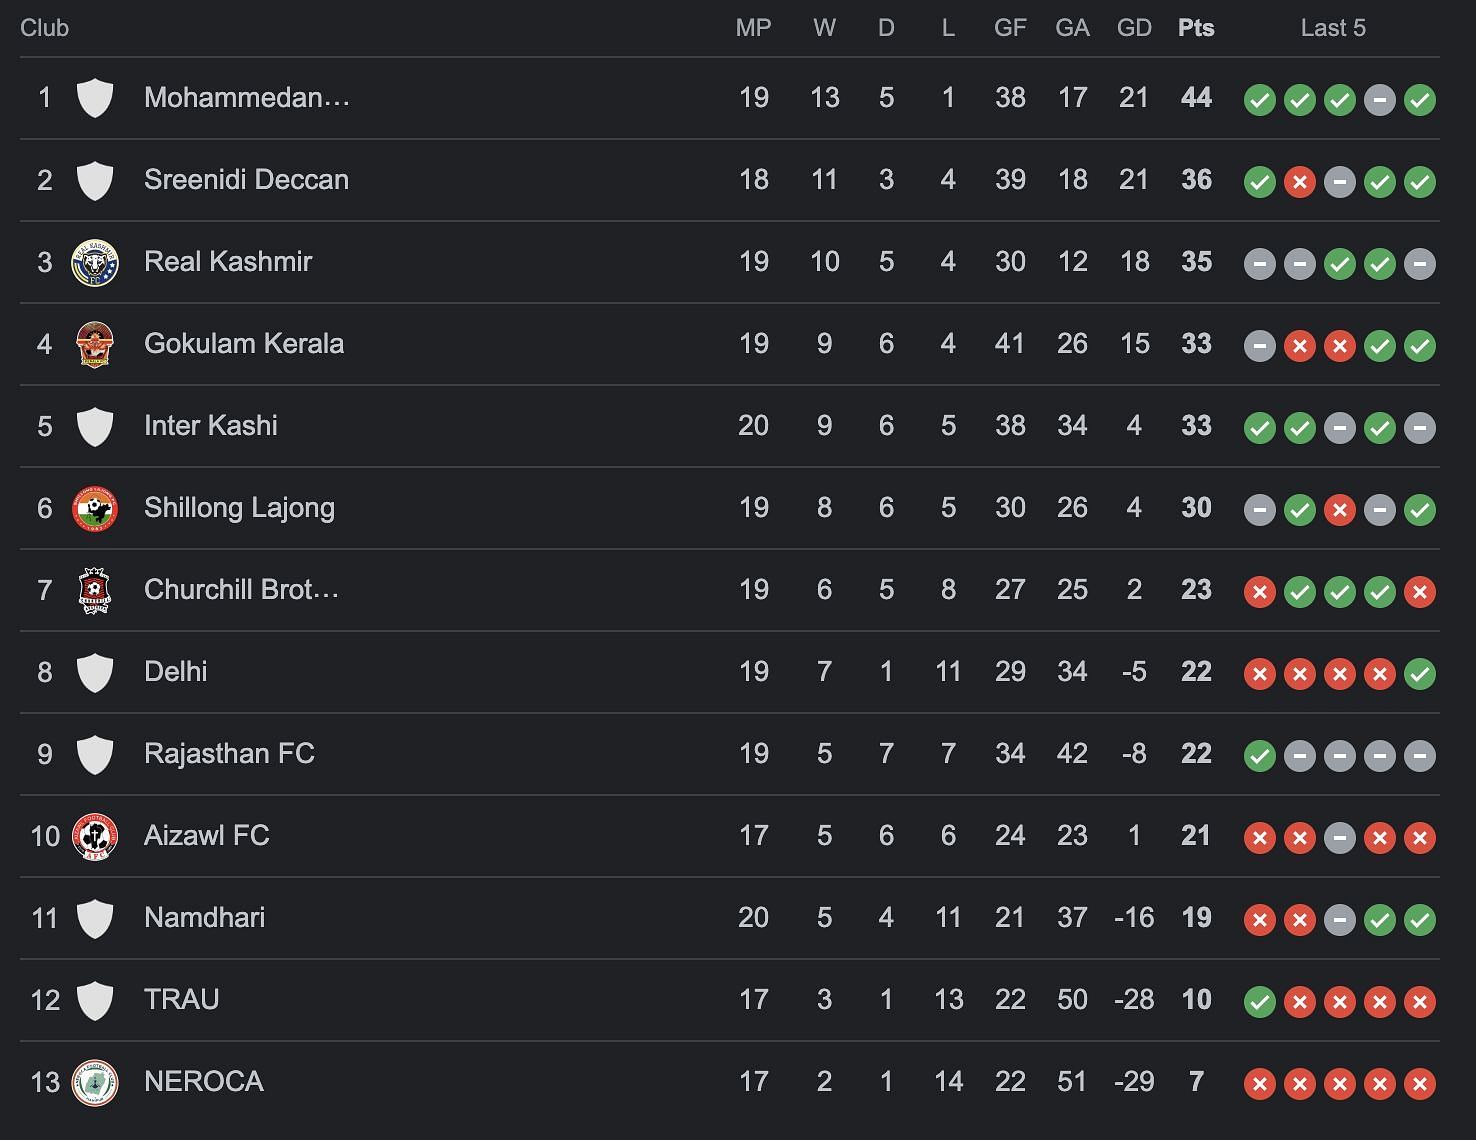 A look at the standings after the conclusion of matchday 21.